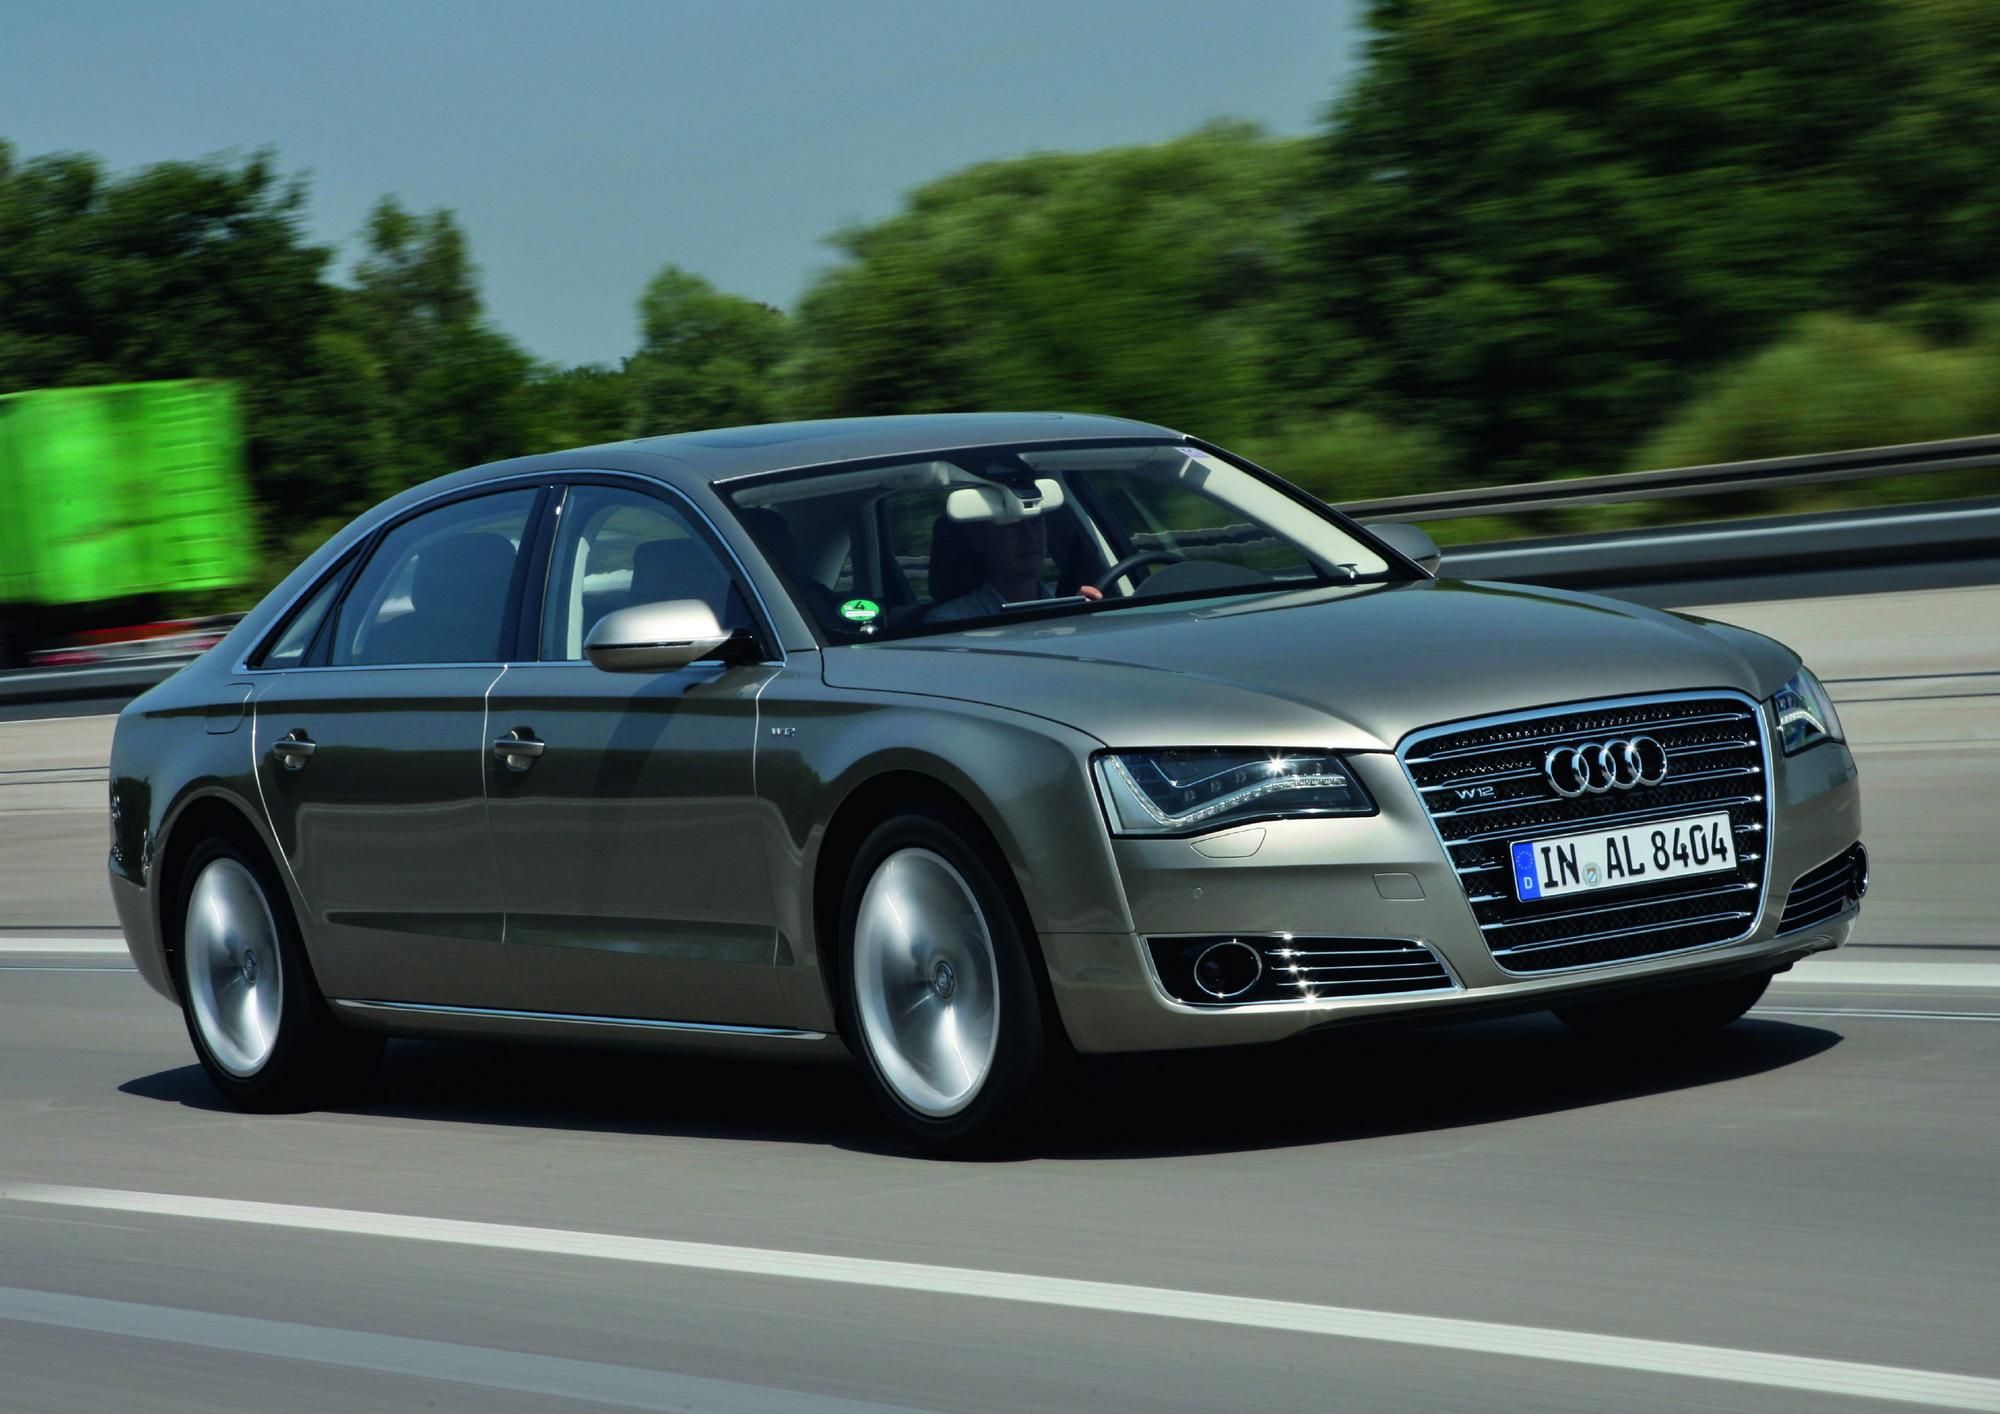 Silver 2012 Audi A8L on a highway